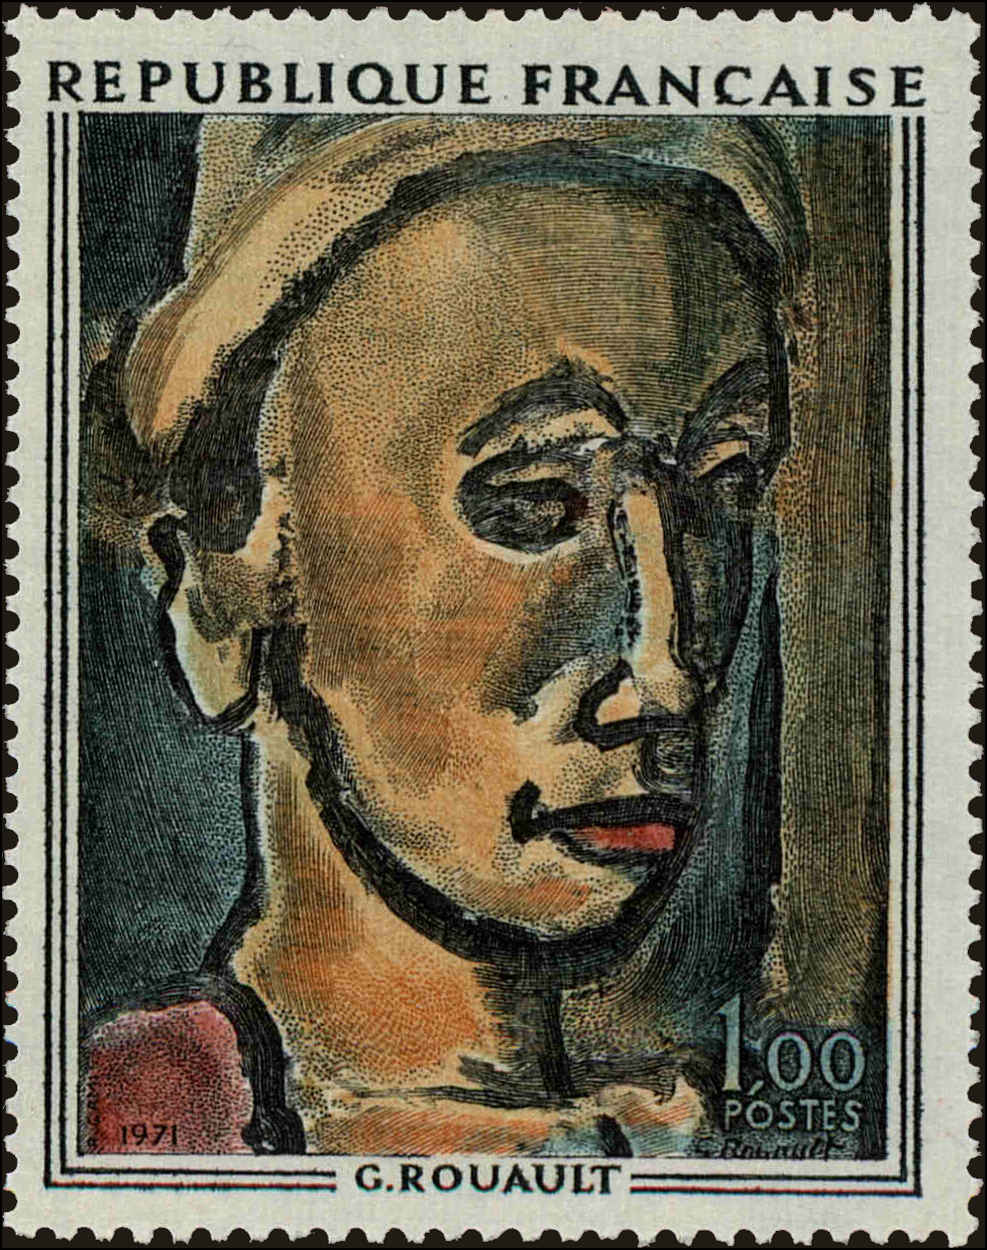 Front view of France 1297 collectors stamp